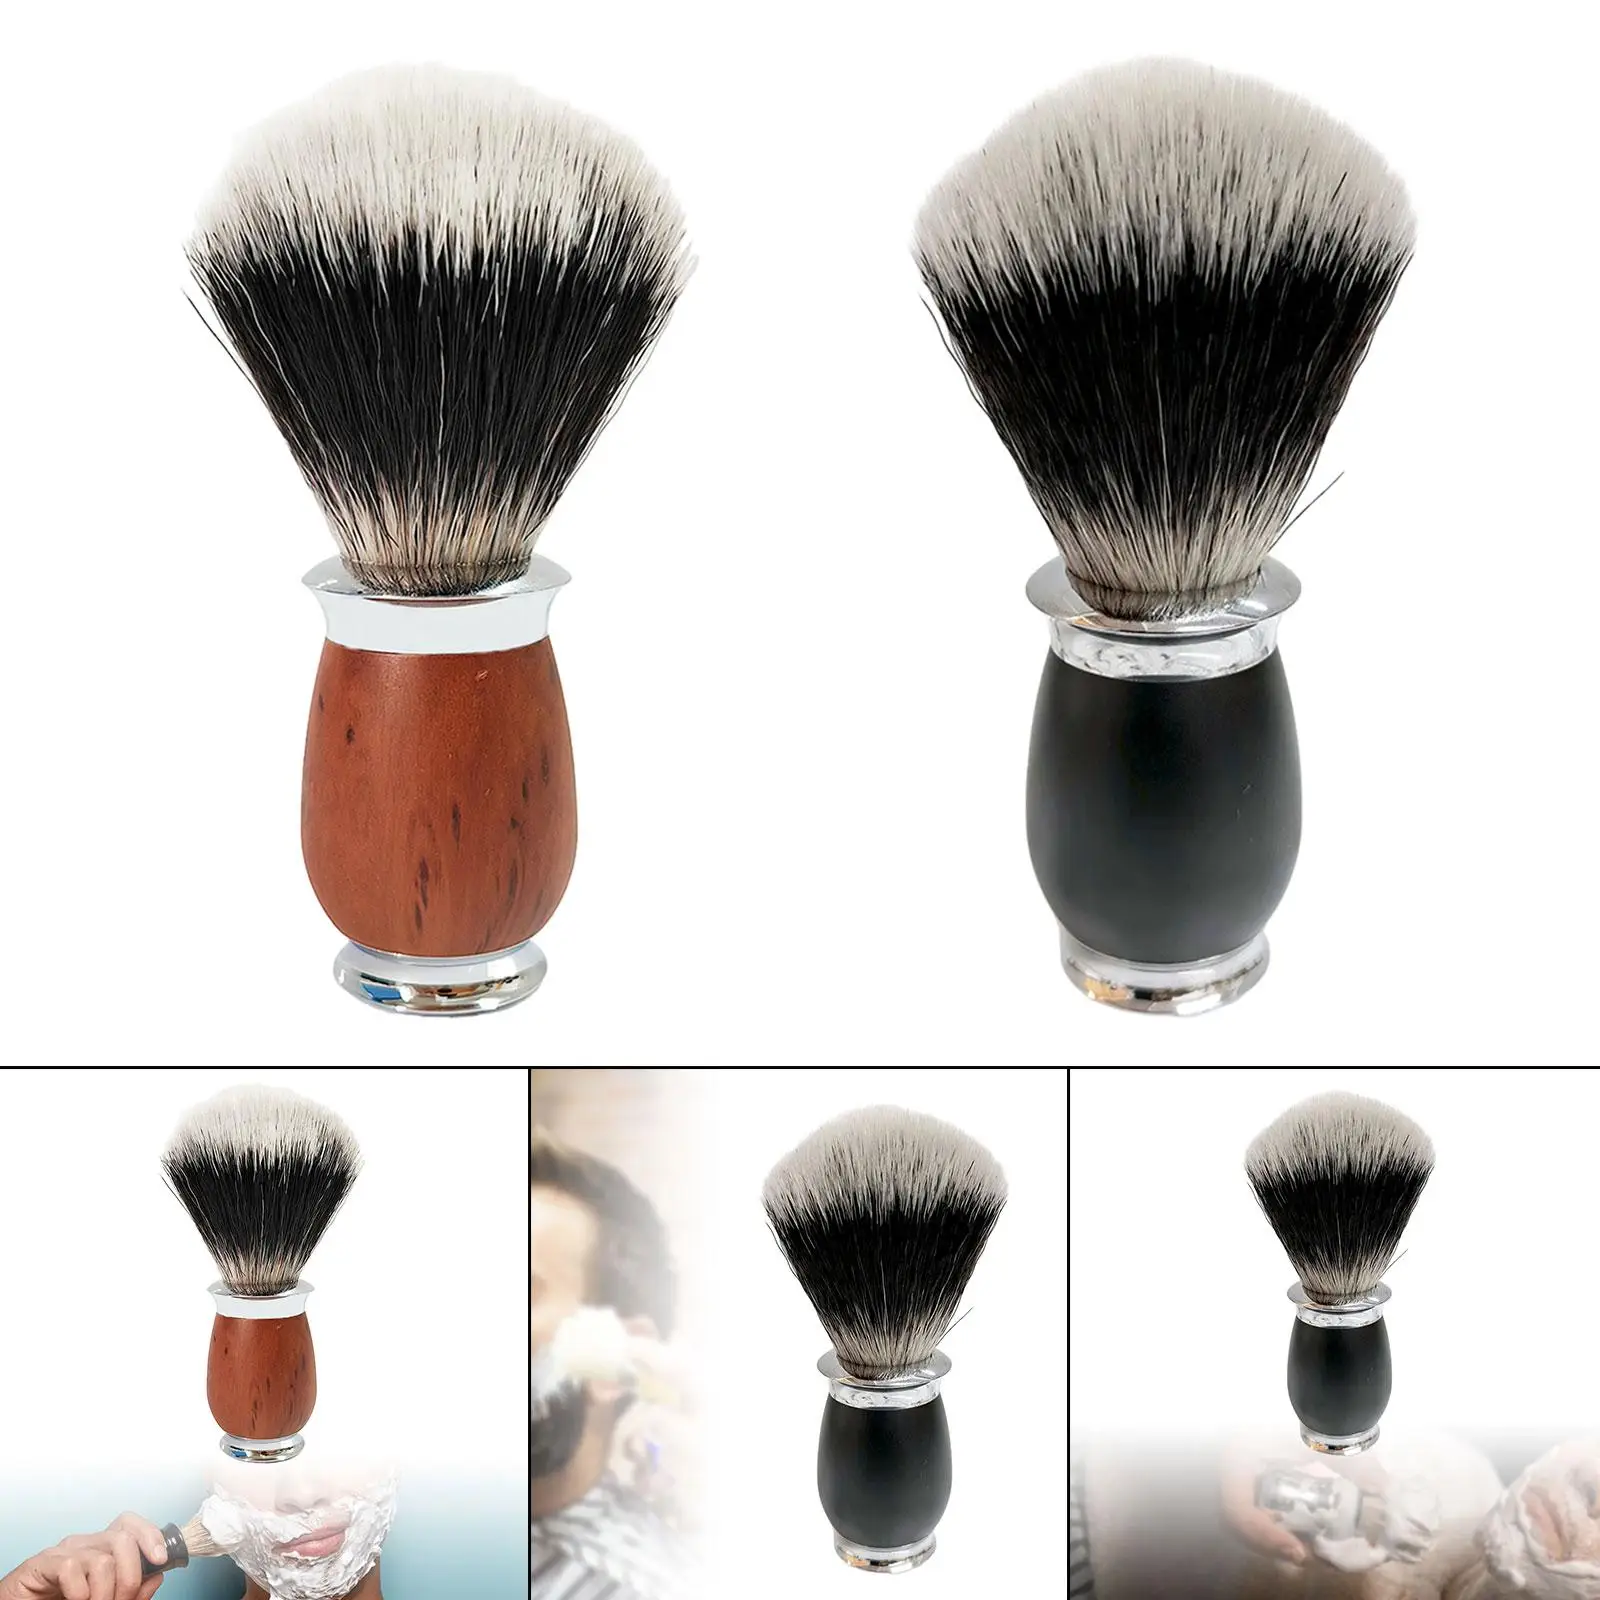 Men Shaving Brush Luxury Rich and Fast Lather Shaving Cream Christmas Gifts Professional for Professional Barber Salon Tools